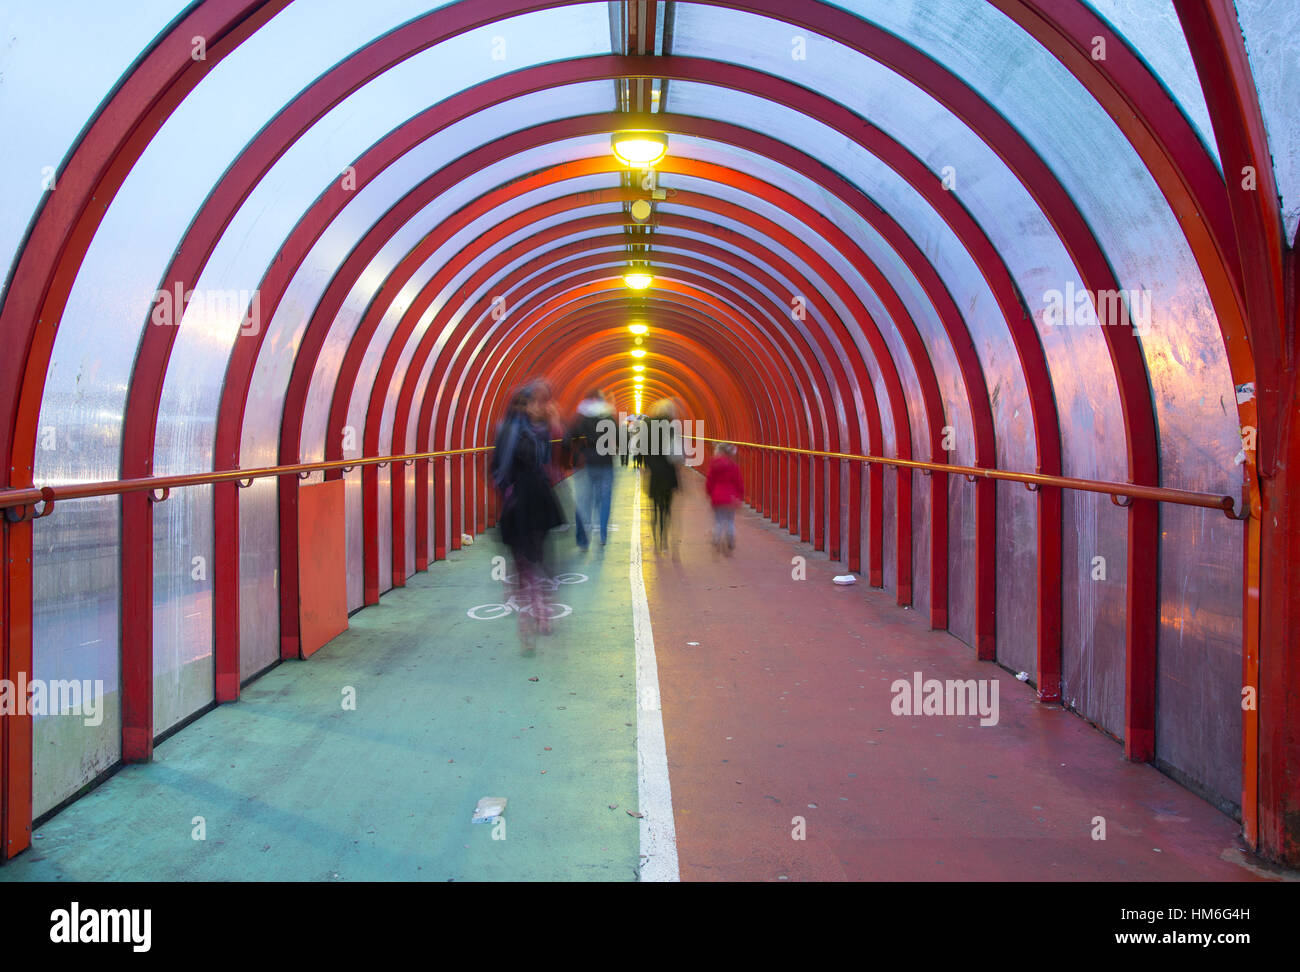 people walking in a pedestrian tunnel and cycle lane Stock Photo